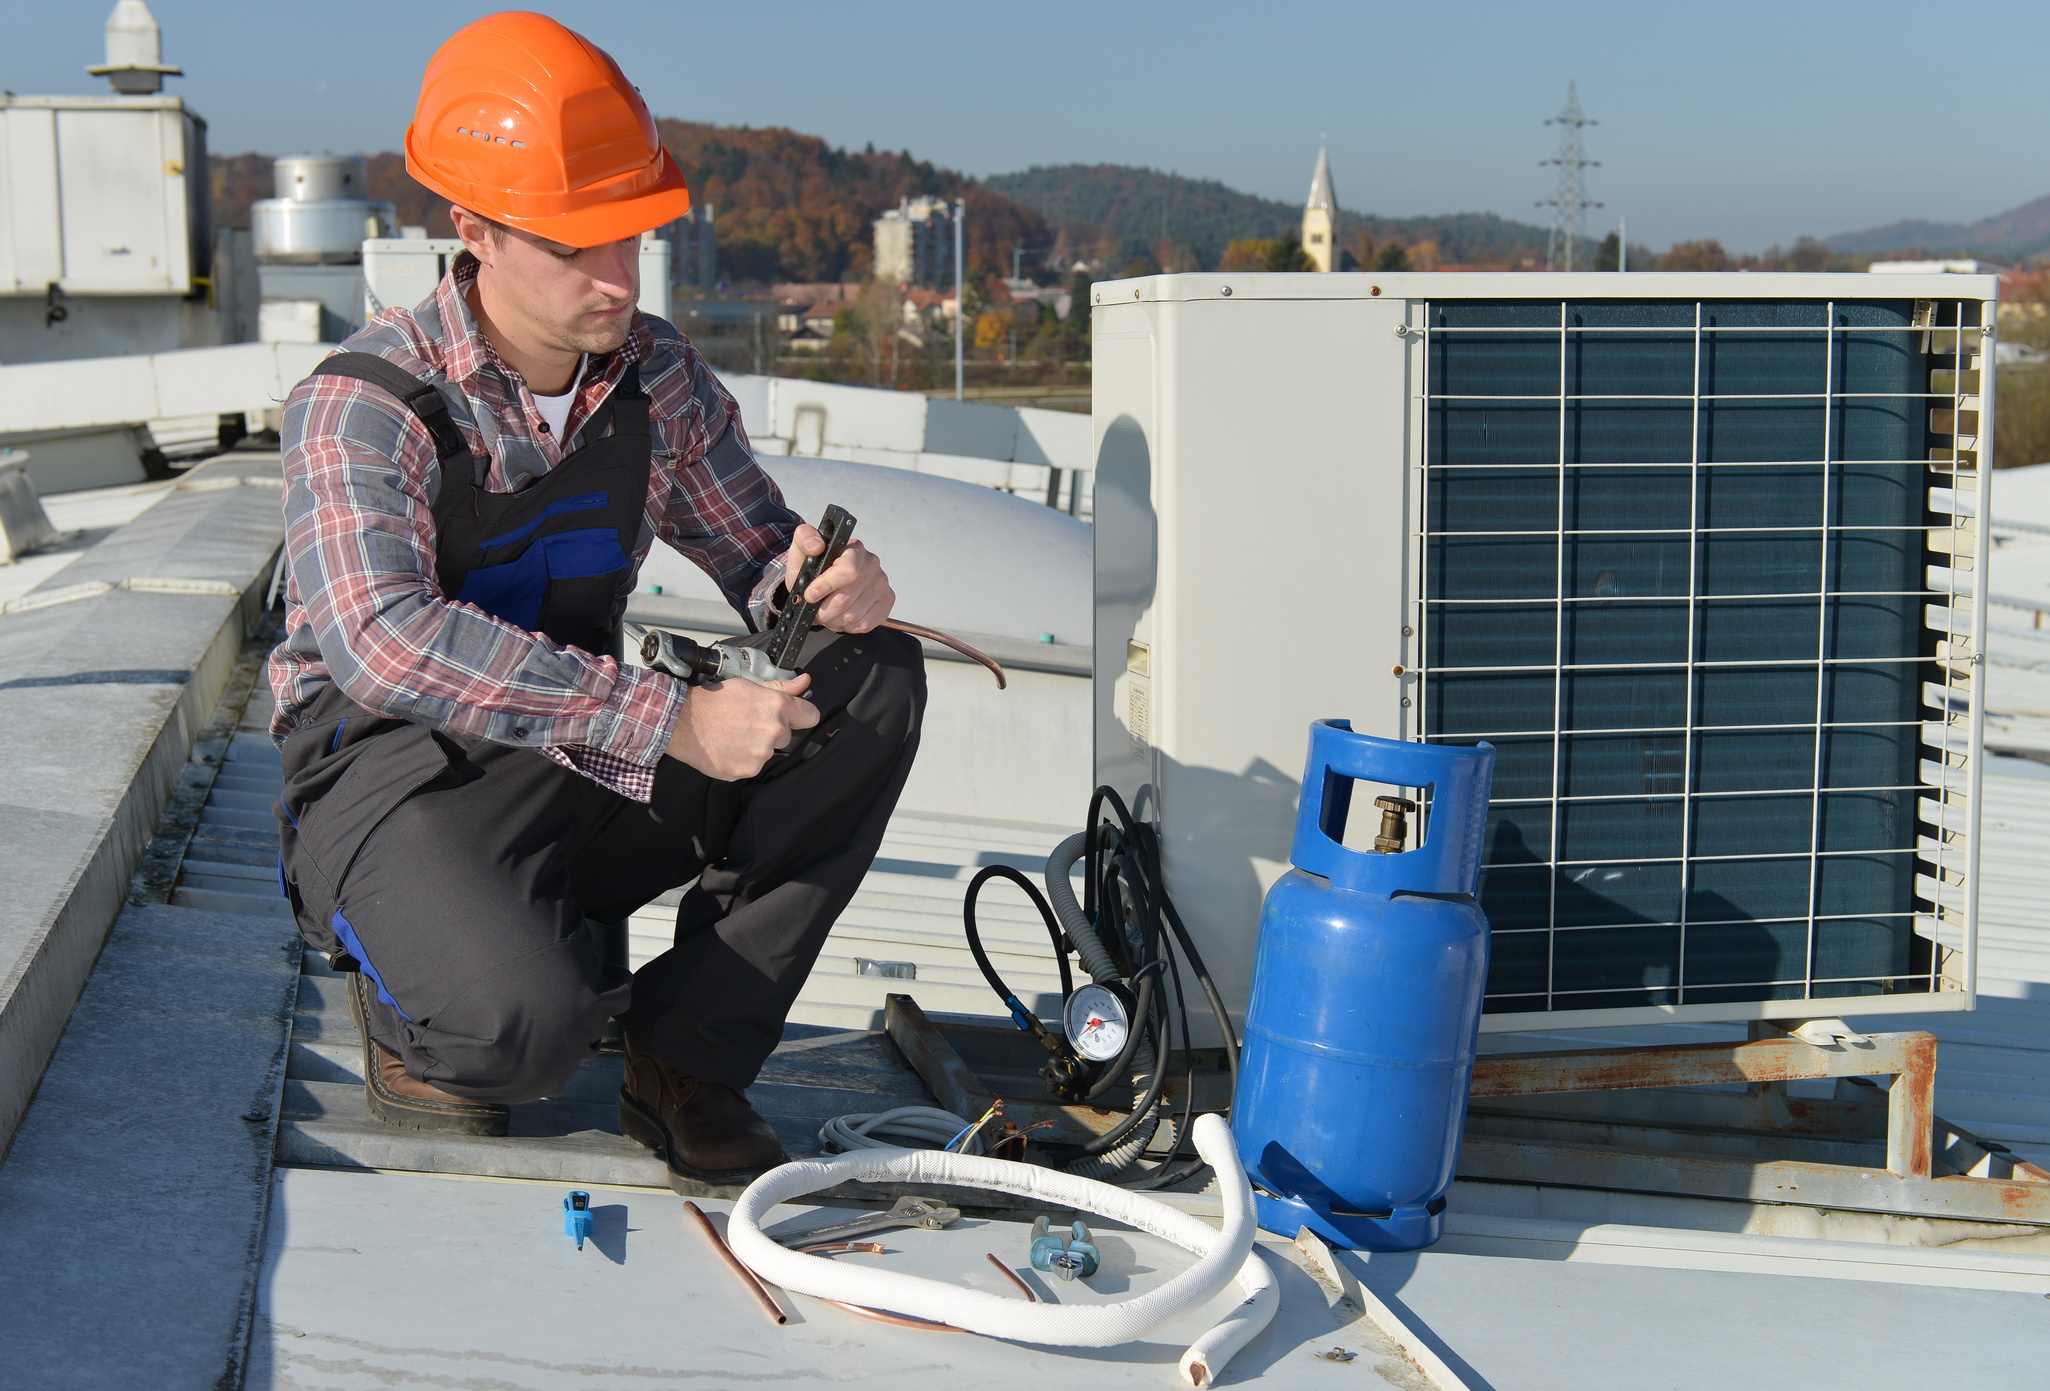 What Are the Signs That You Need an HVAC Repair?